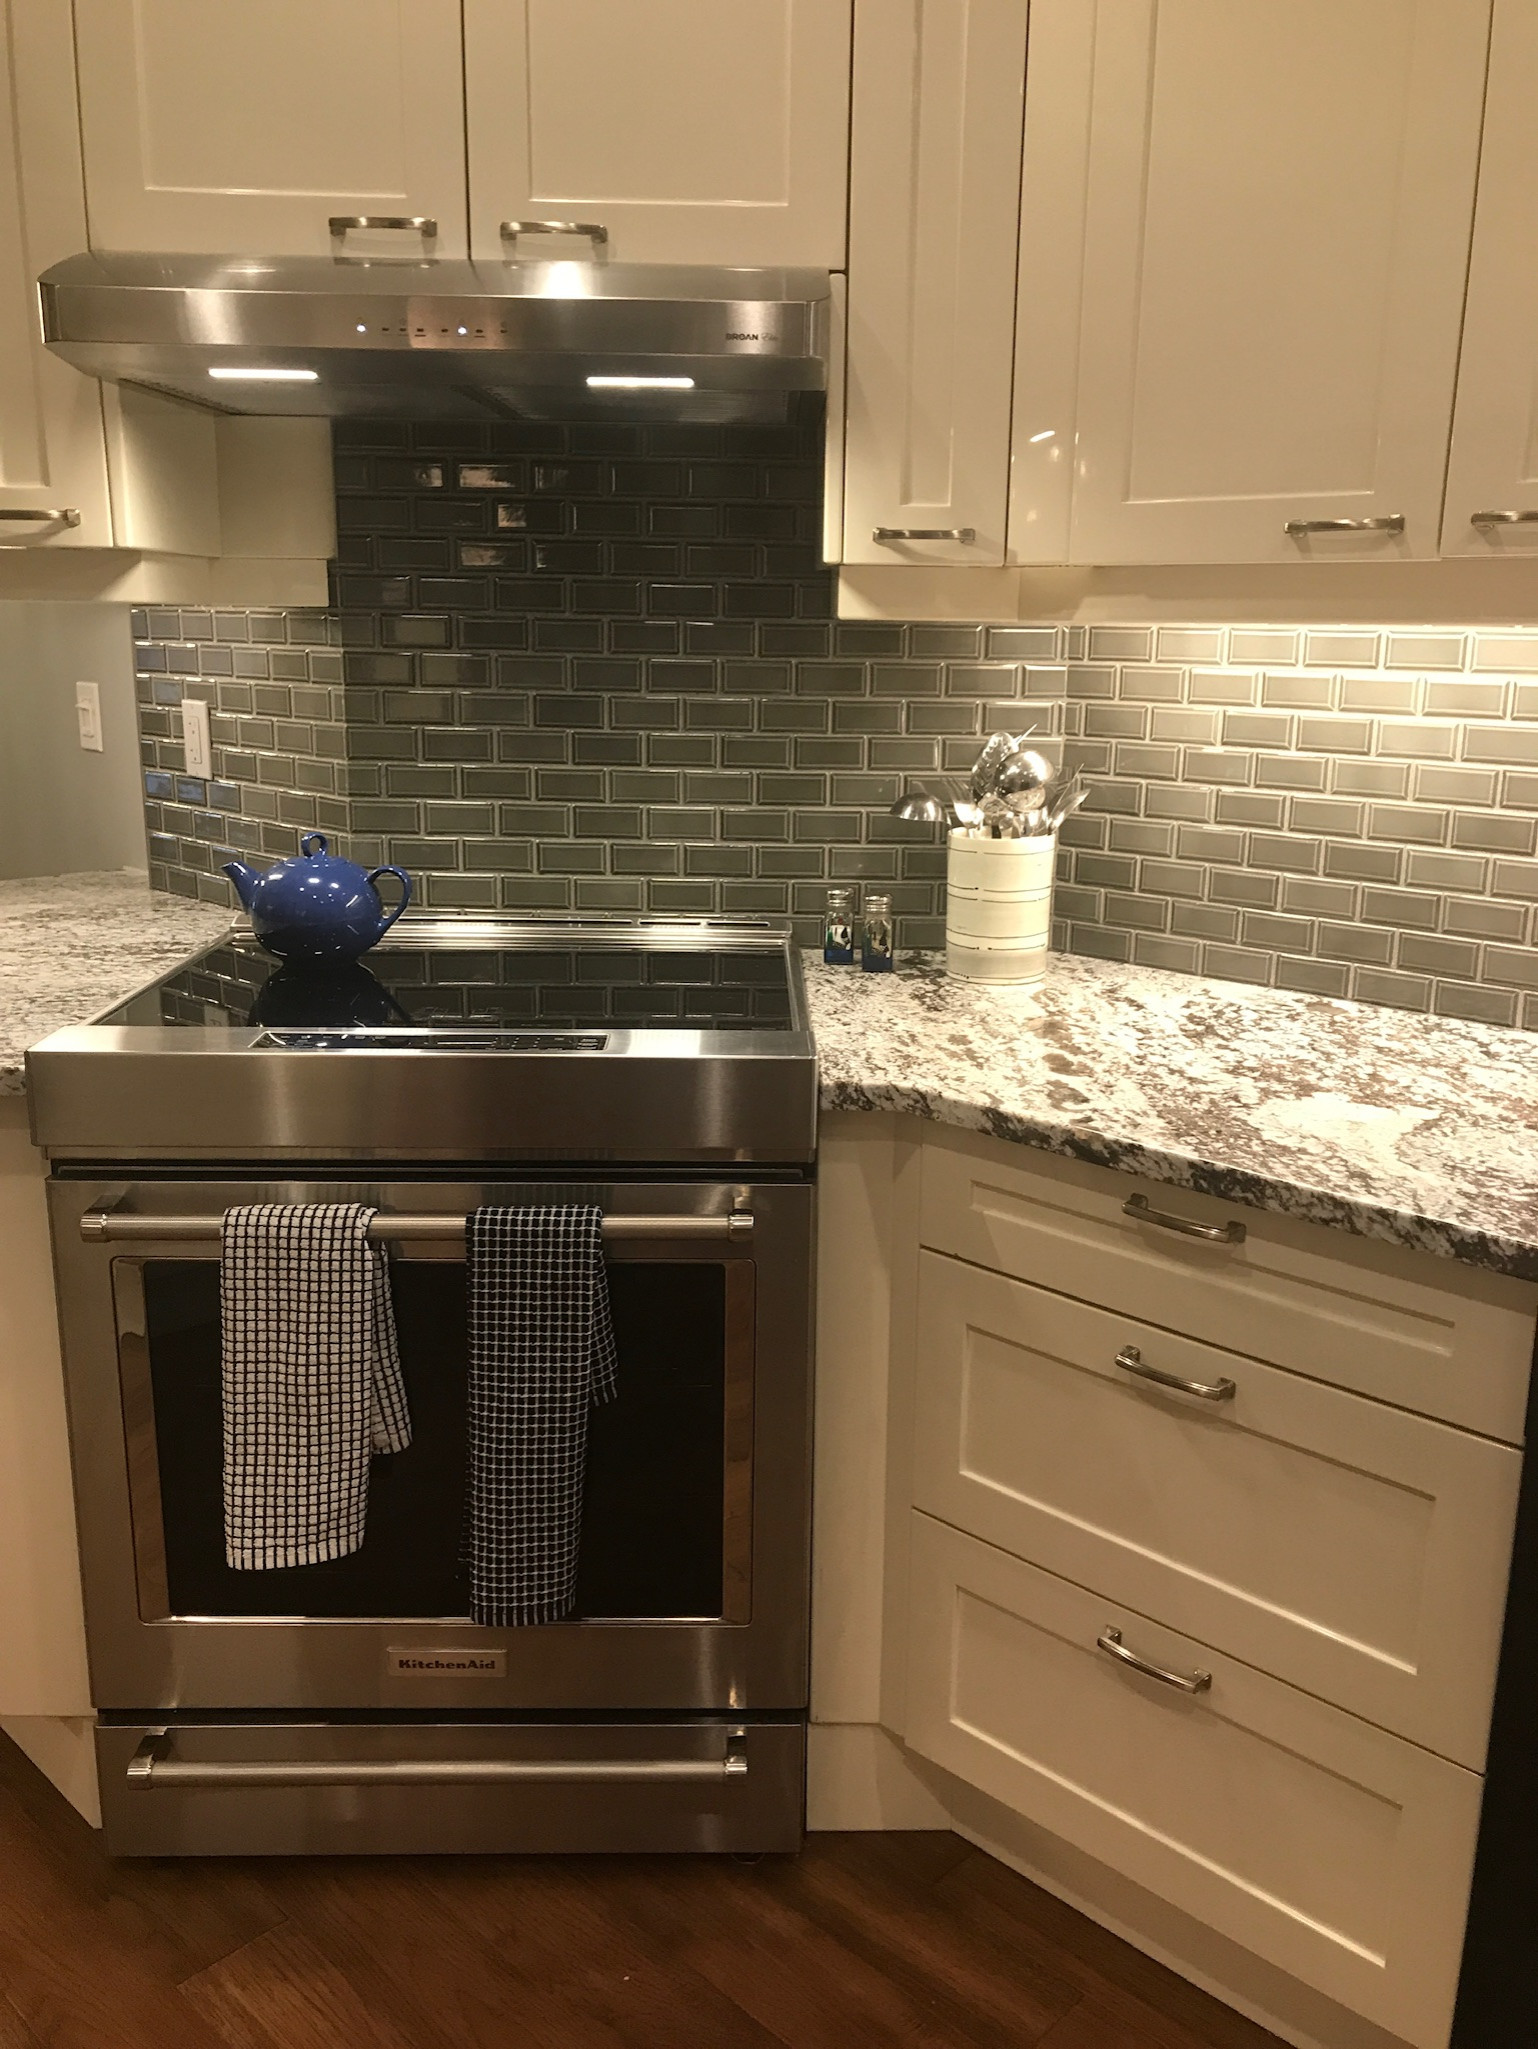 Updated counters and backsplash with original cabinetry